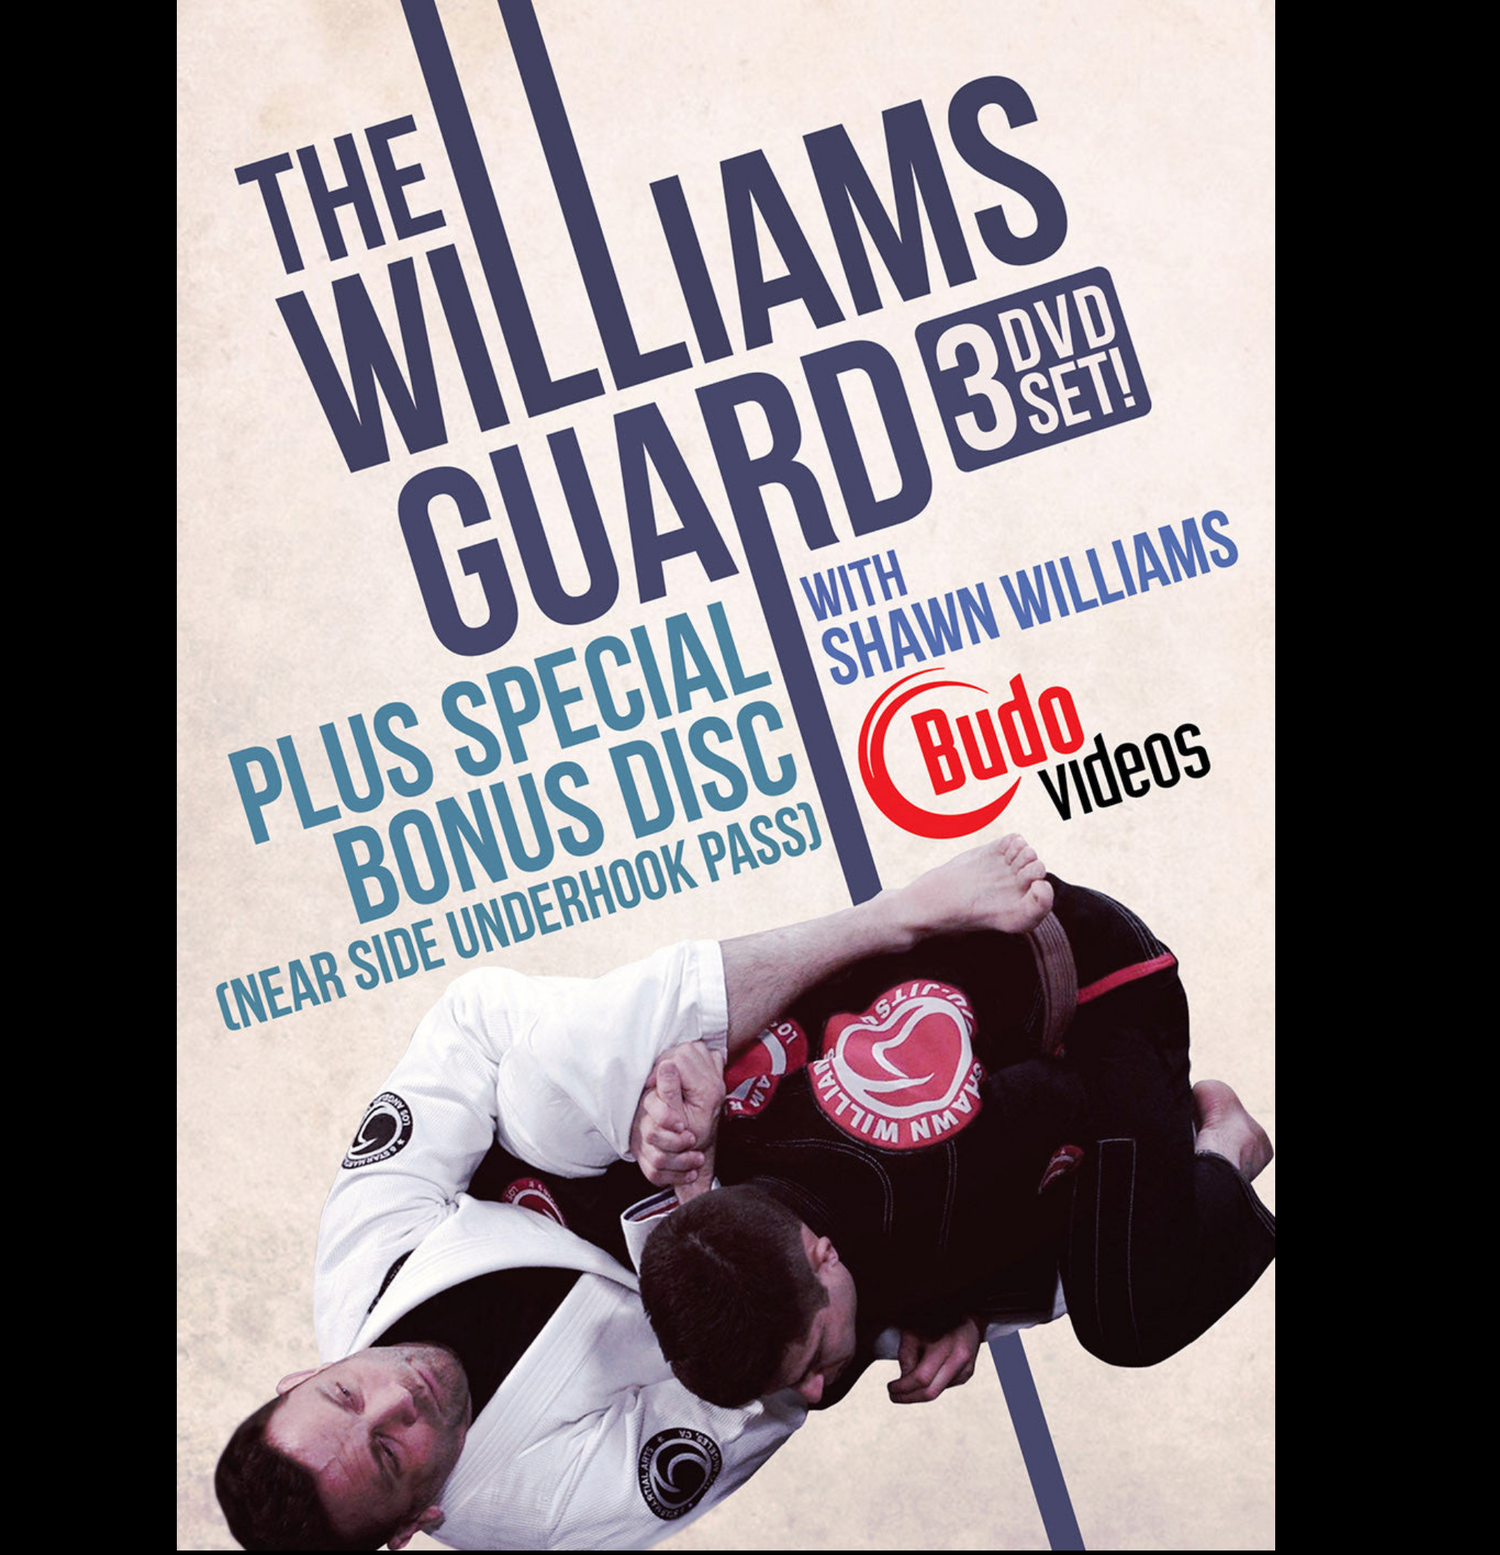 The Williams Guard Series by Shawn Williams (On Demand)